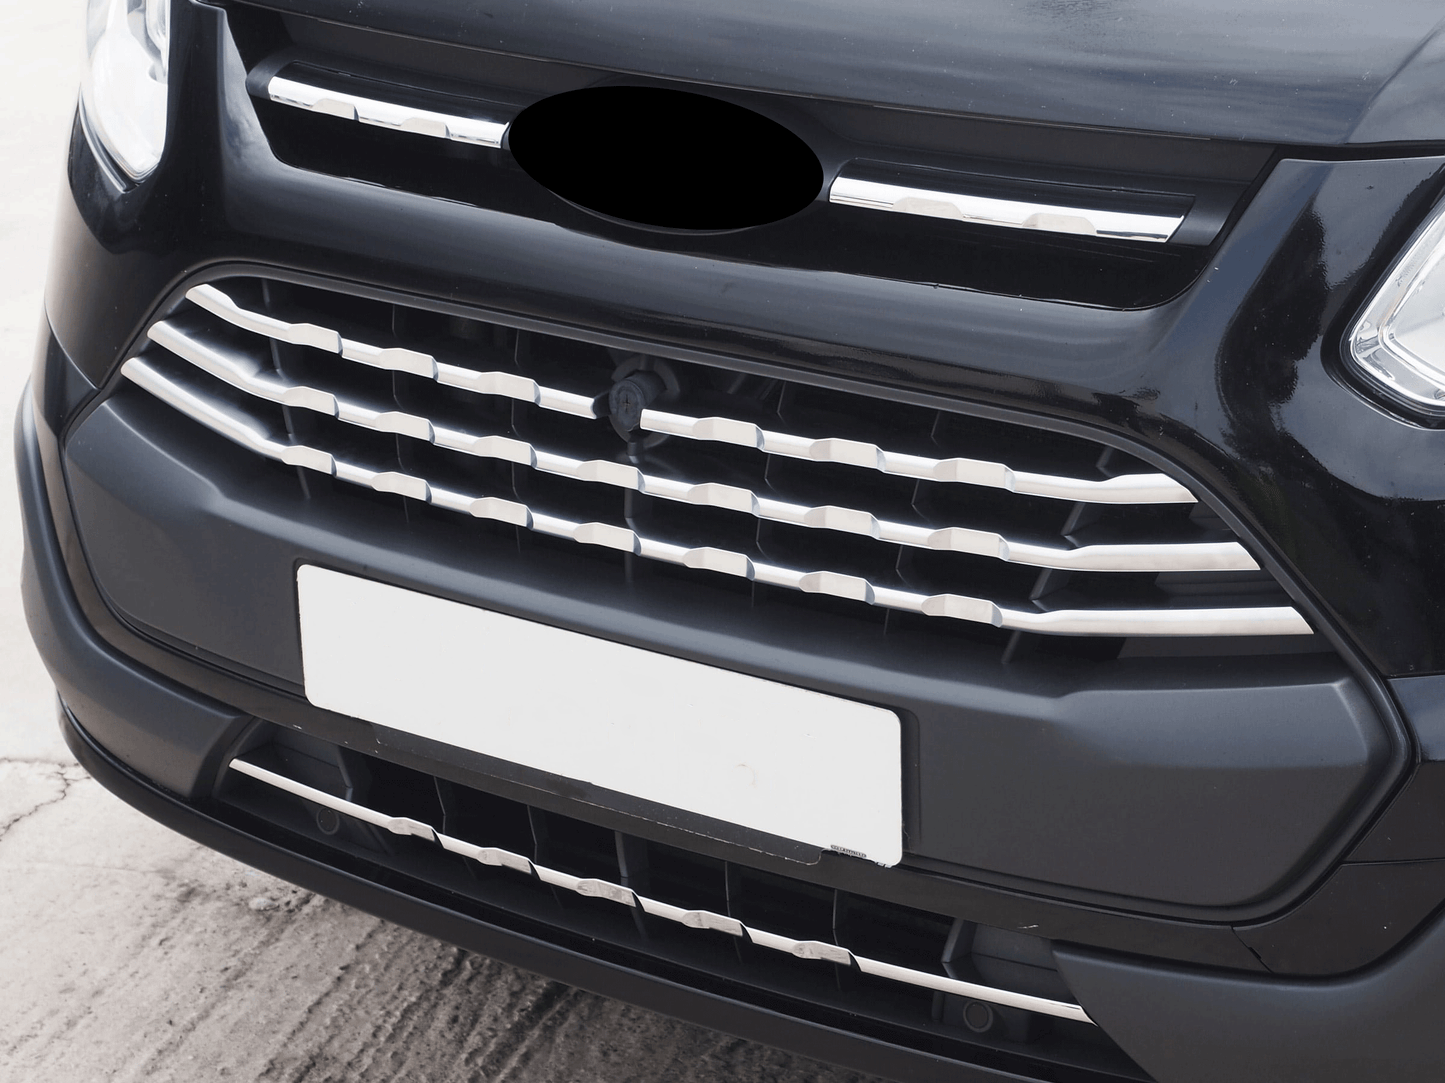 Ford Transit Custom Front Grille Trims Shiny Chrome Front Styling (7Pcs) 2012 - 2018 MK1